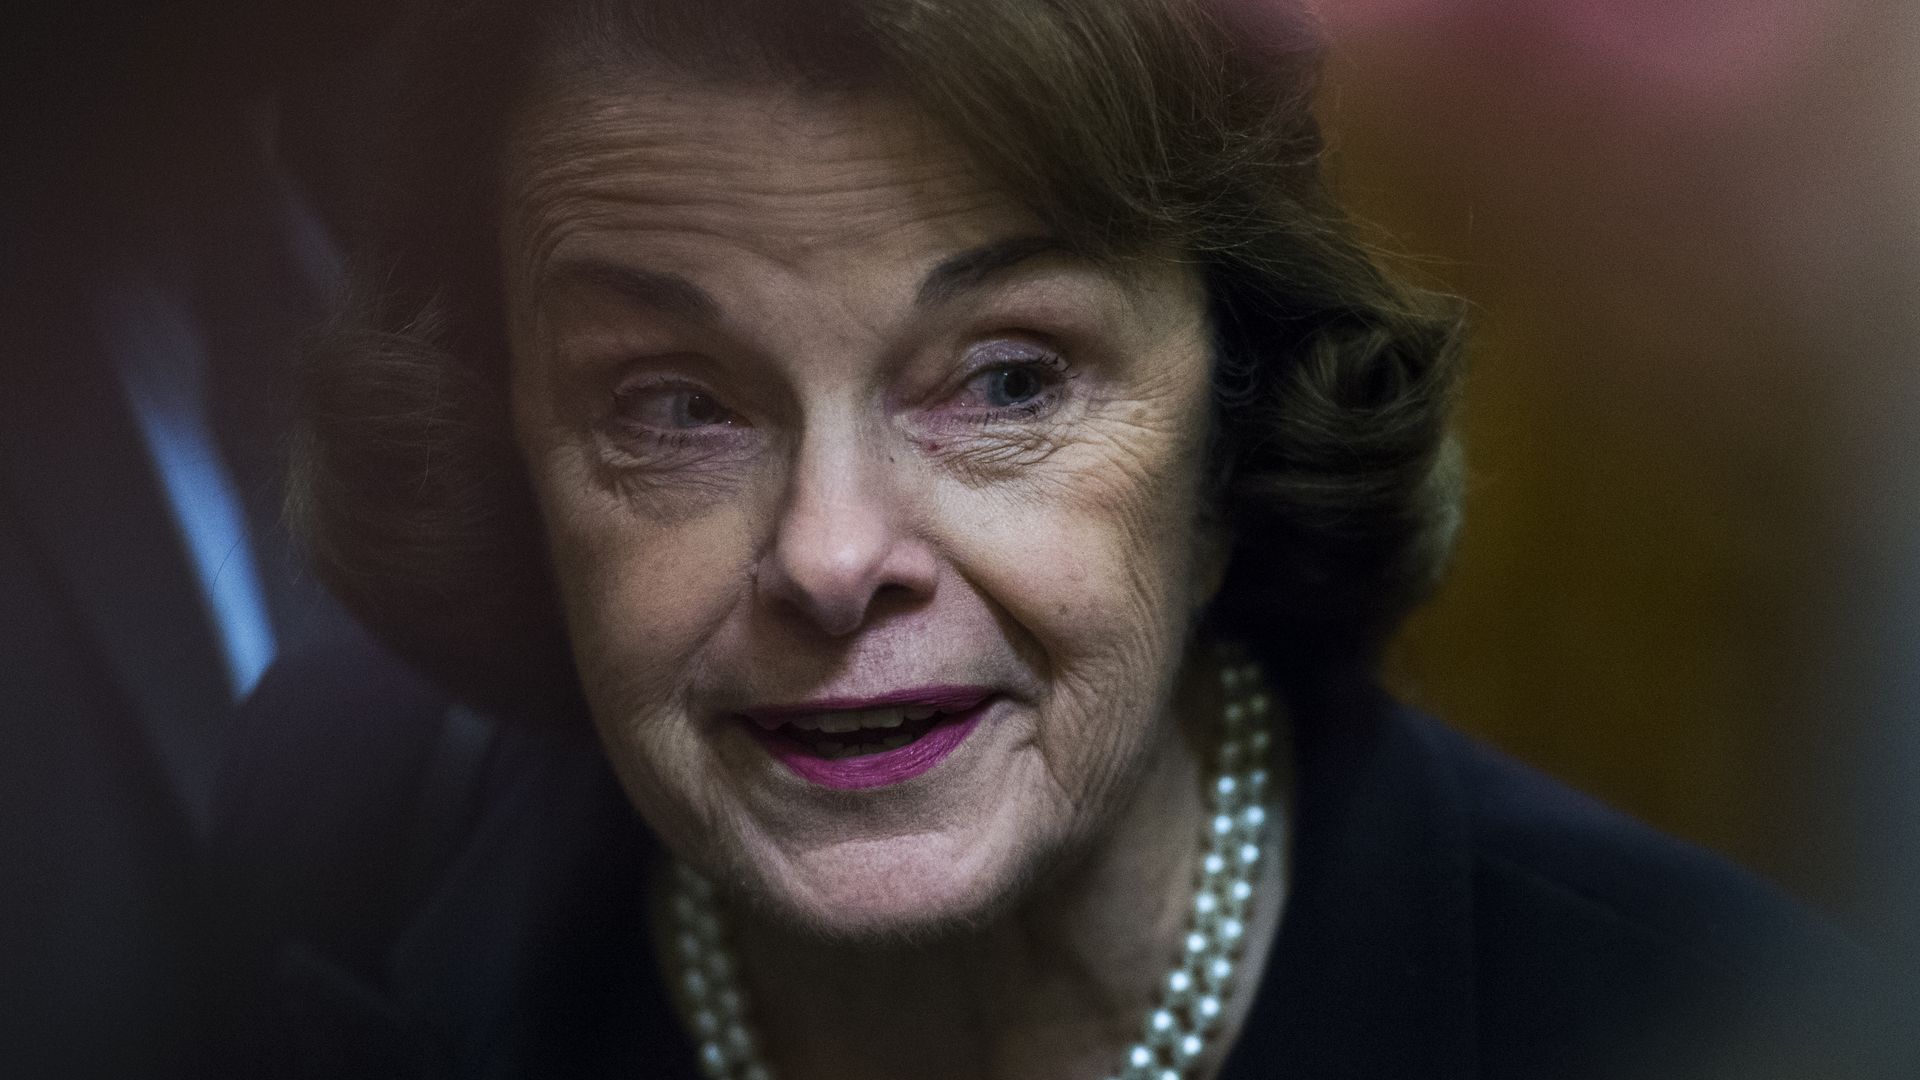 This is a photo of Dianne Feinstein, who was rebuked yesterday by her party's liberal leaders